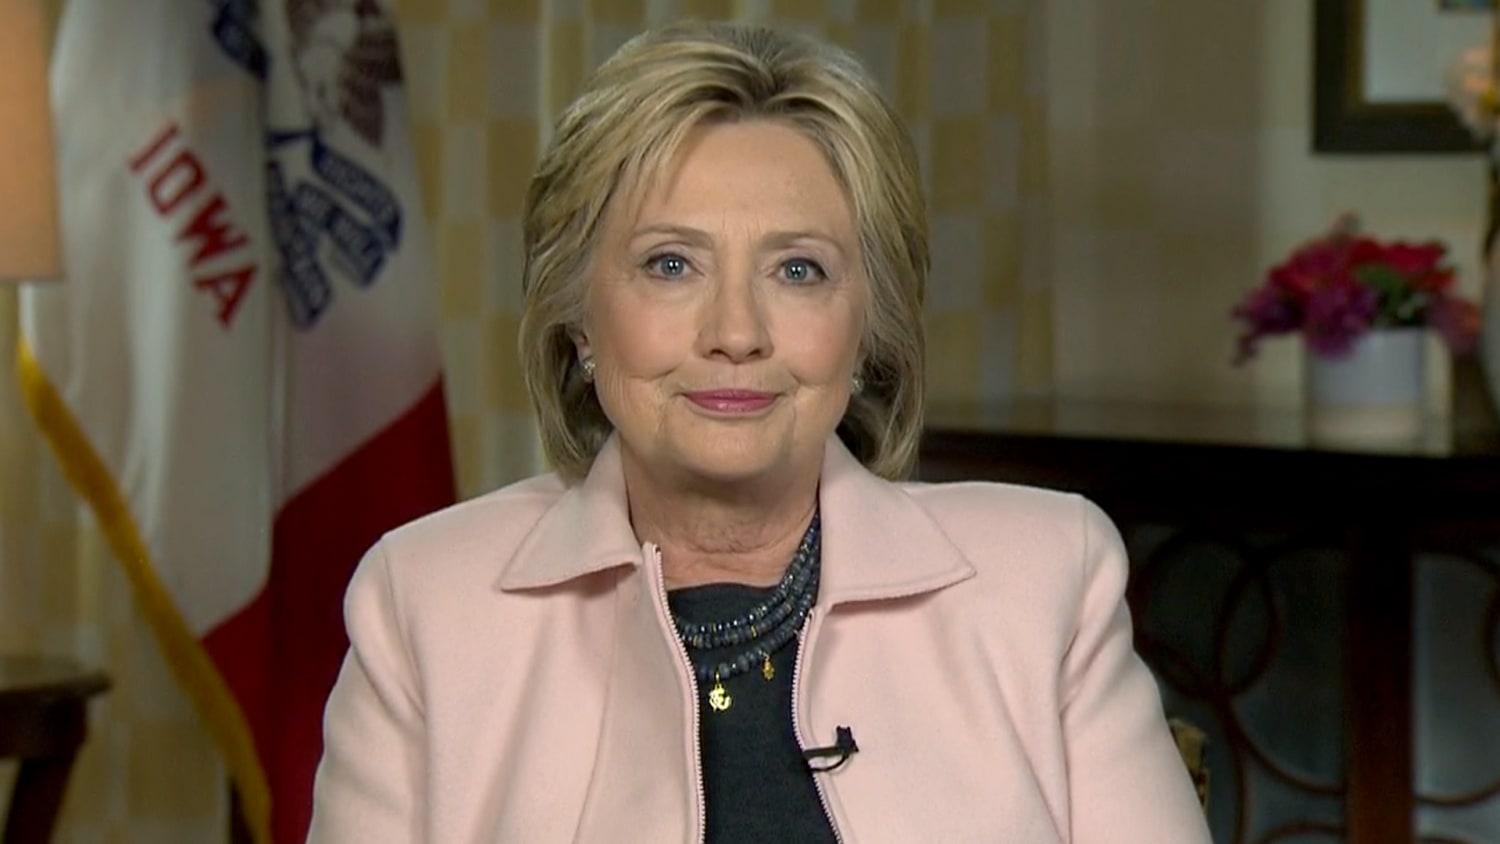 Hillary Clinton defends Obama legacy, tells Iowa voters: 'I have the r...